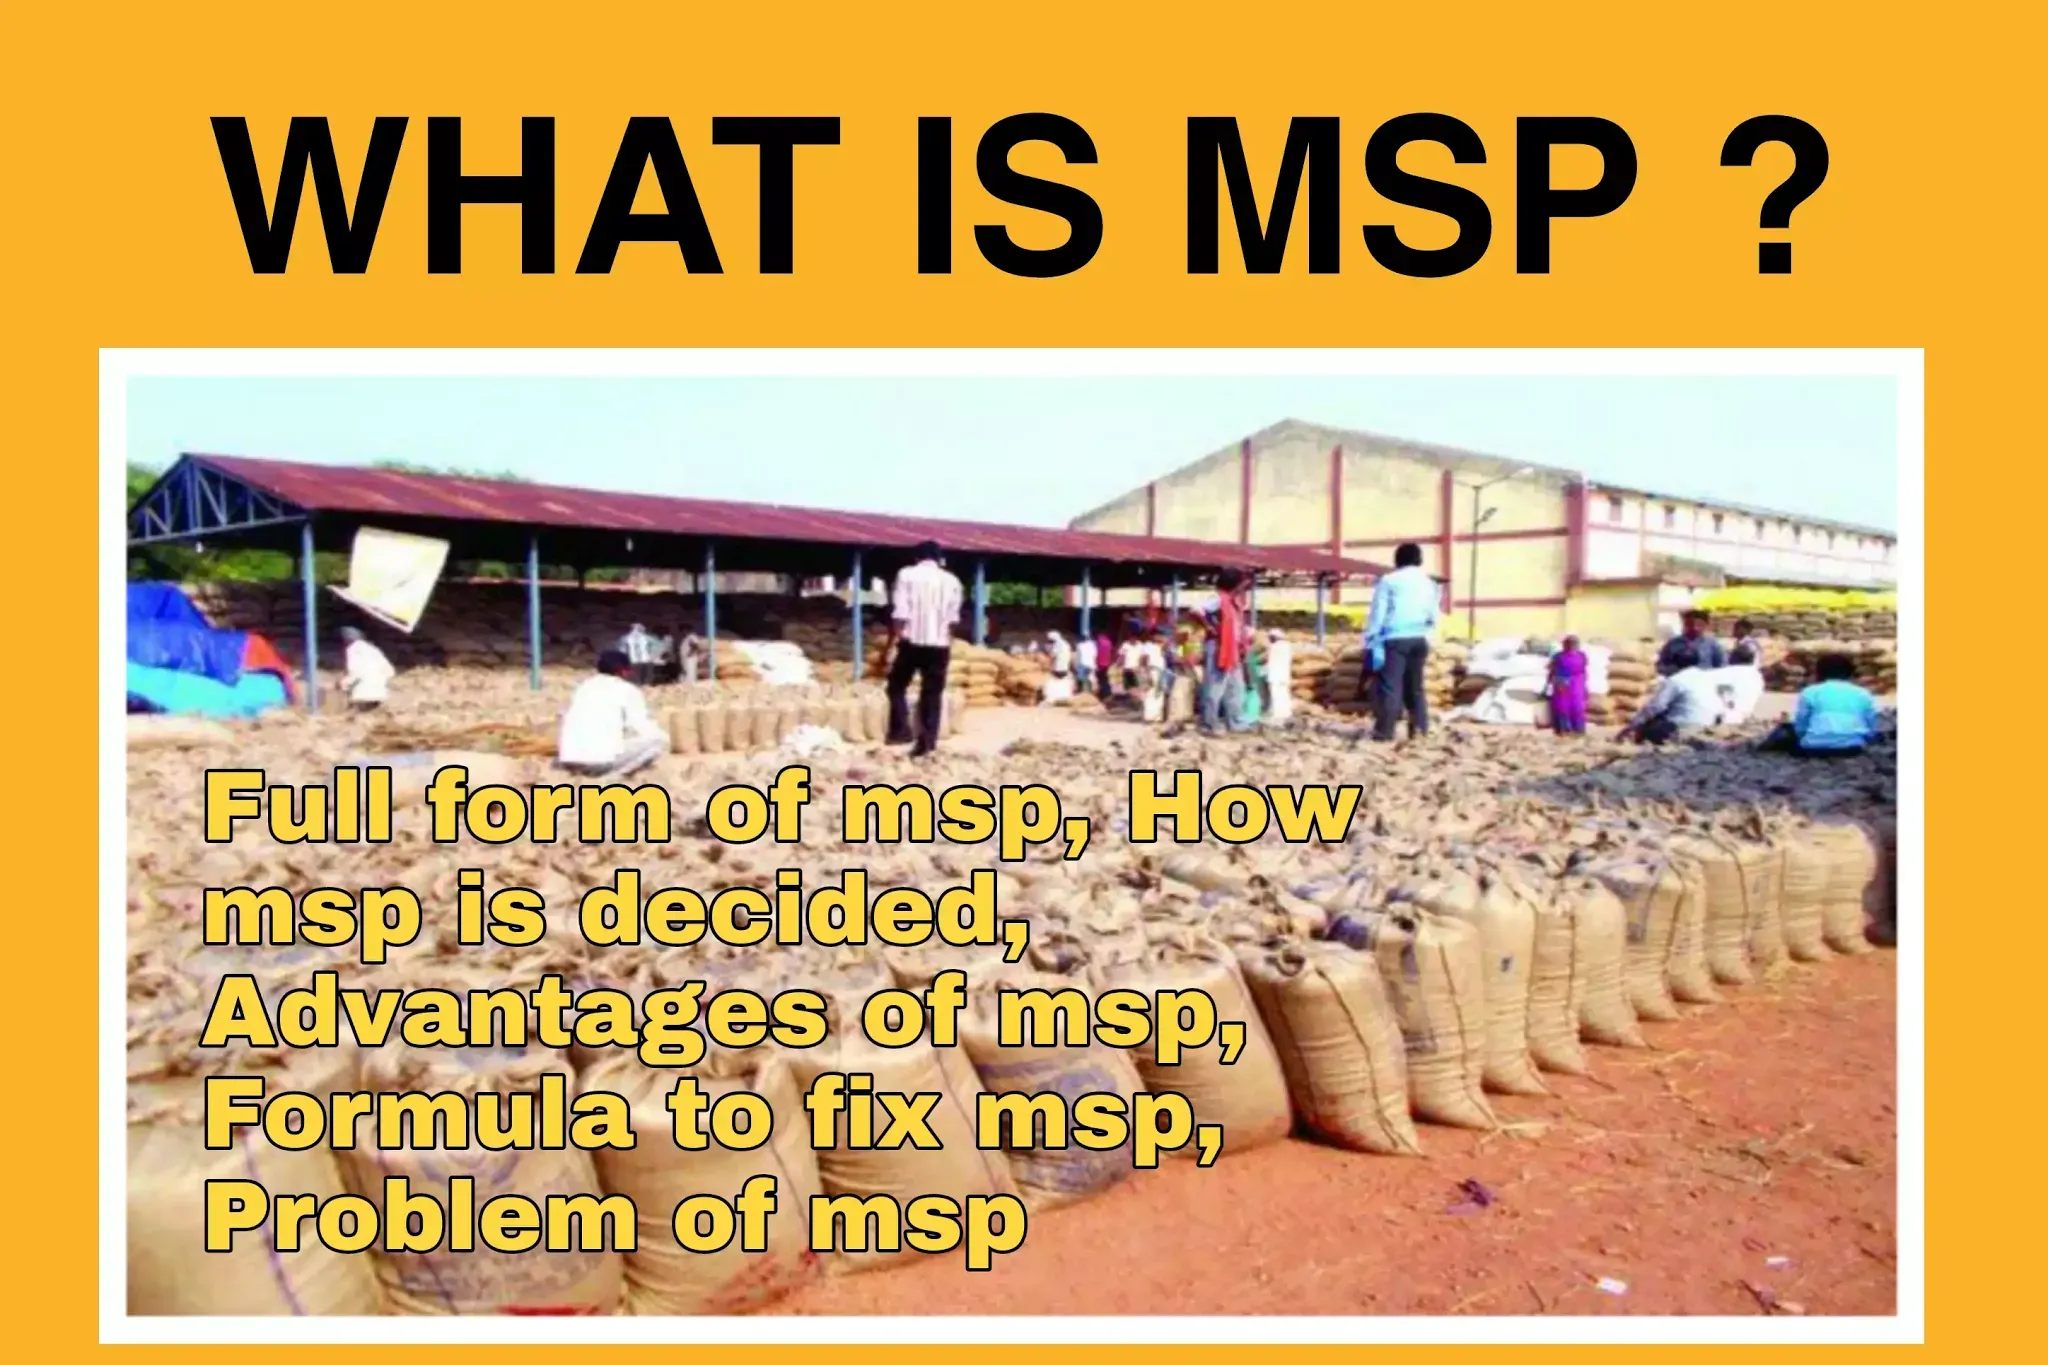 What is MSP?  Full name of msp, how msp is decided, advantages of msp, formula to fix msp, problem of msp